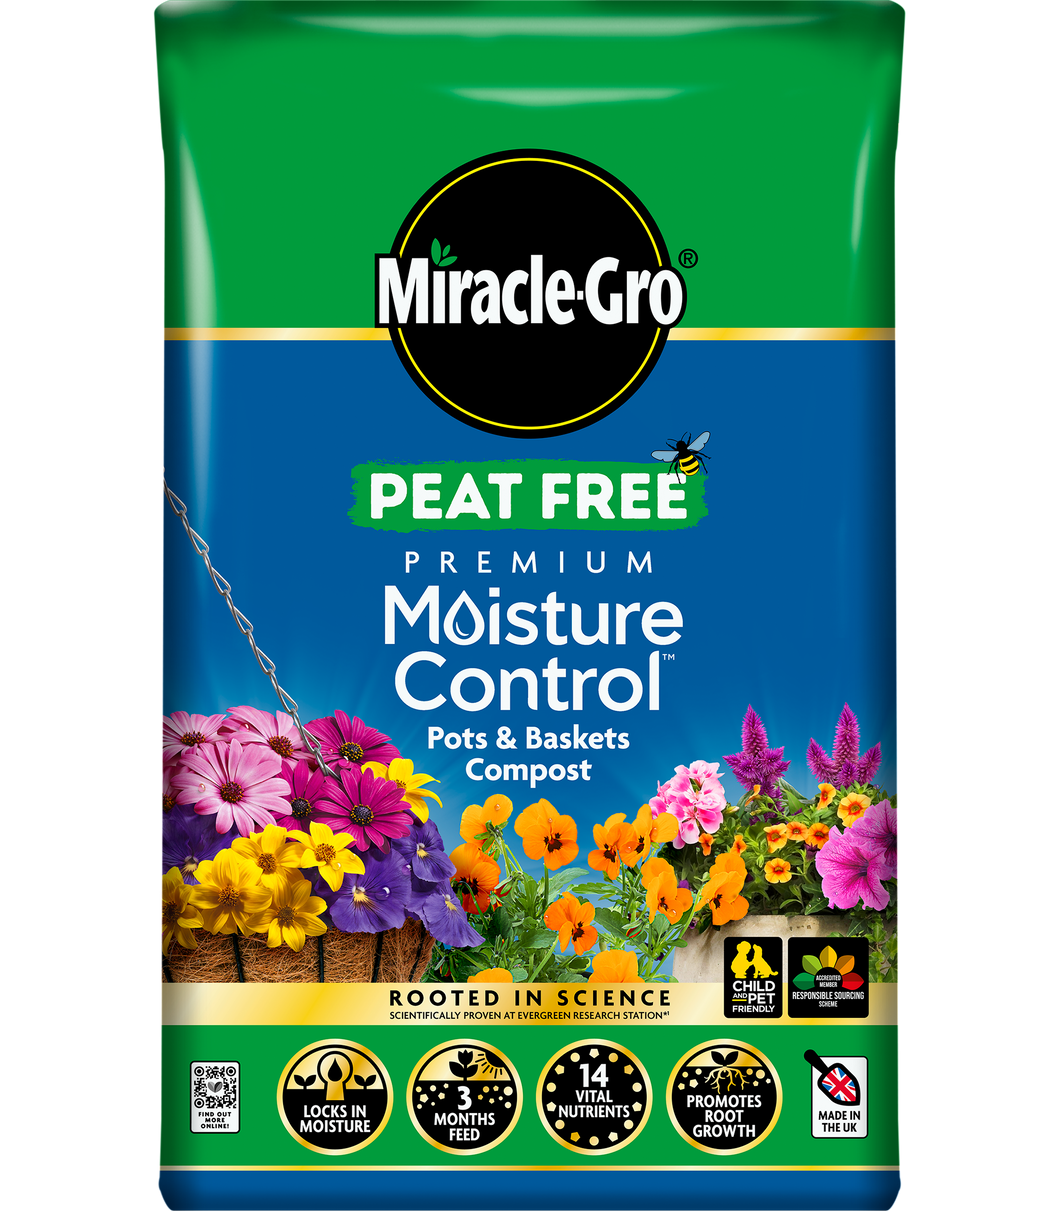 Miracle Gro Moisture Control peat free compost 40l (2 for £14)